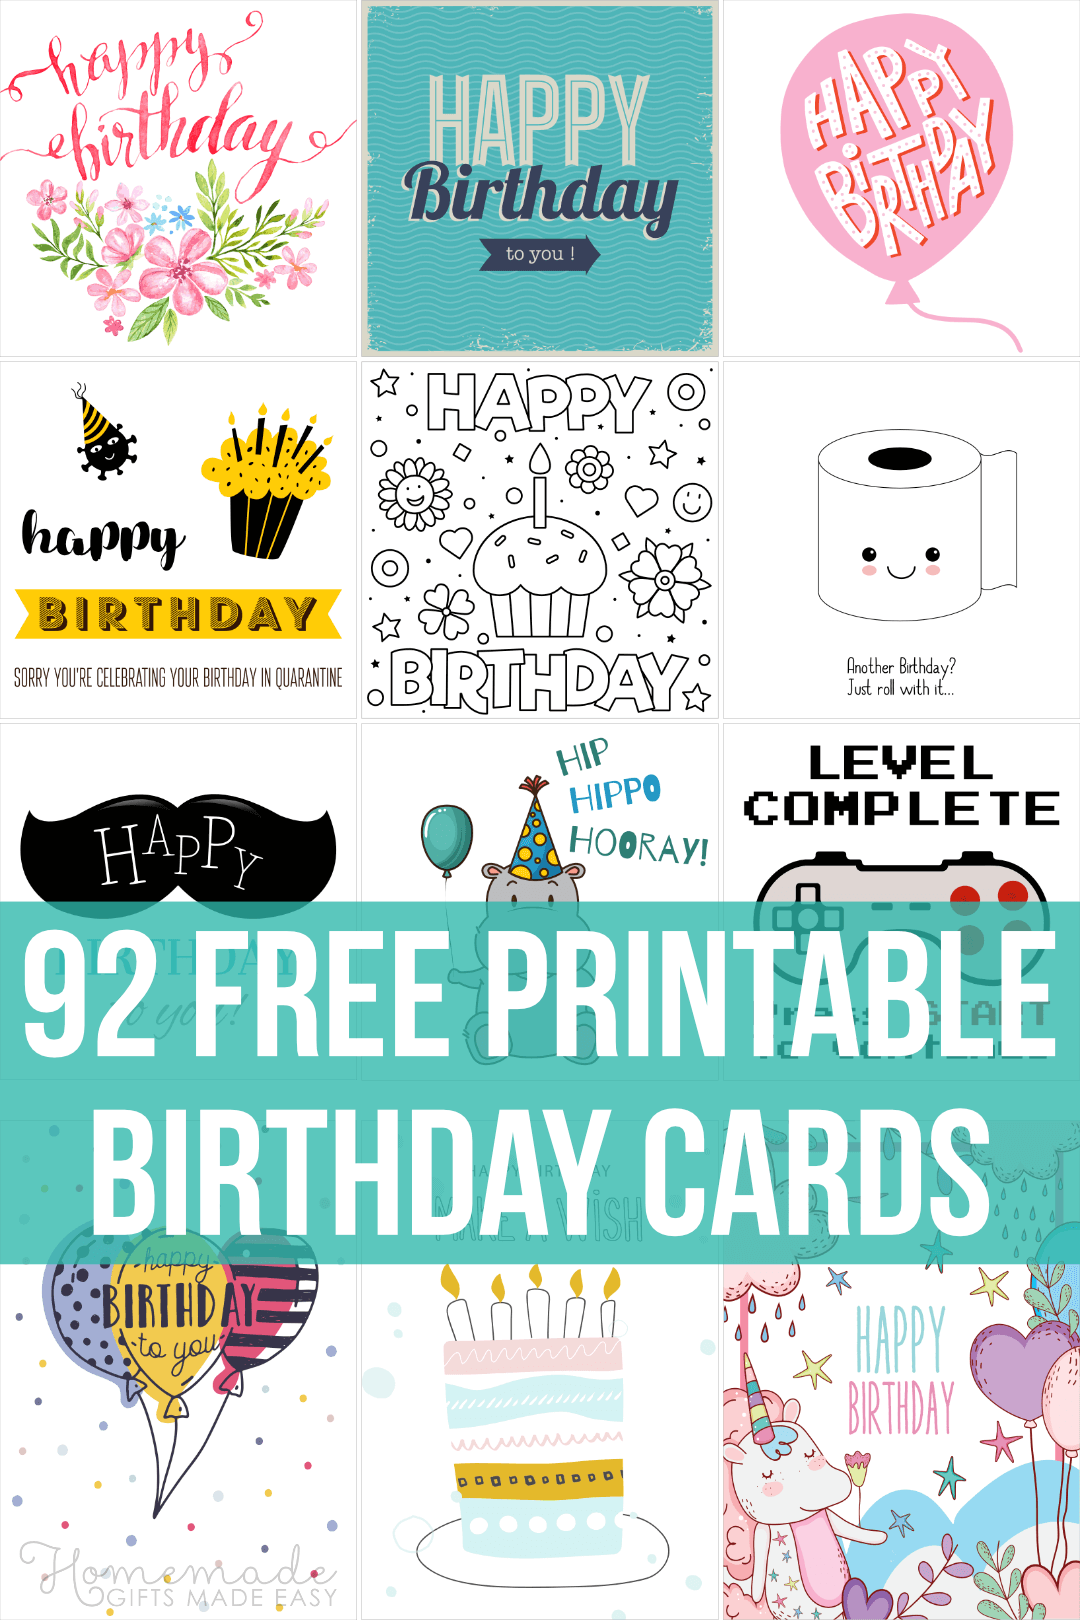 Birthday Card Free Template from www.homemade-gifts-made-easy.com